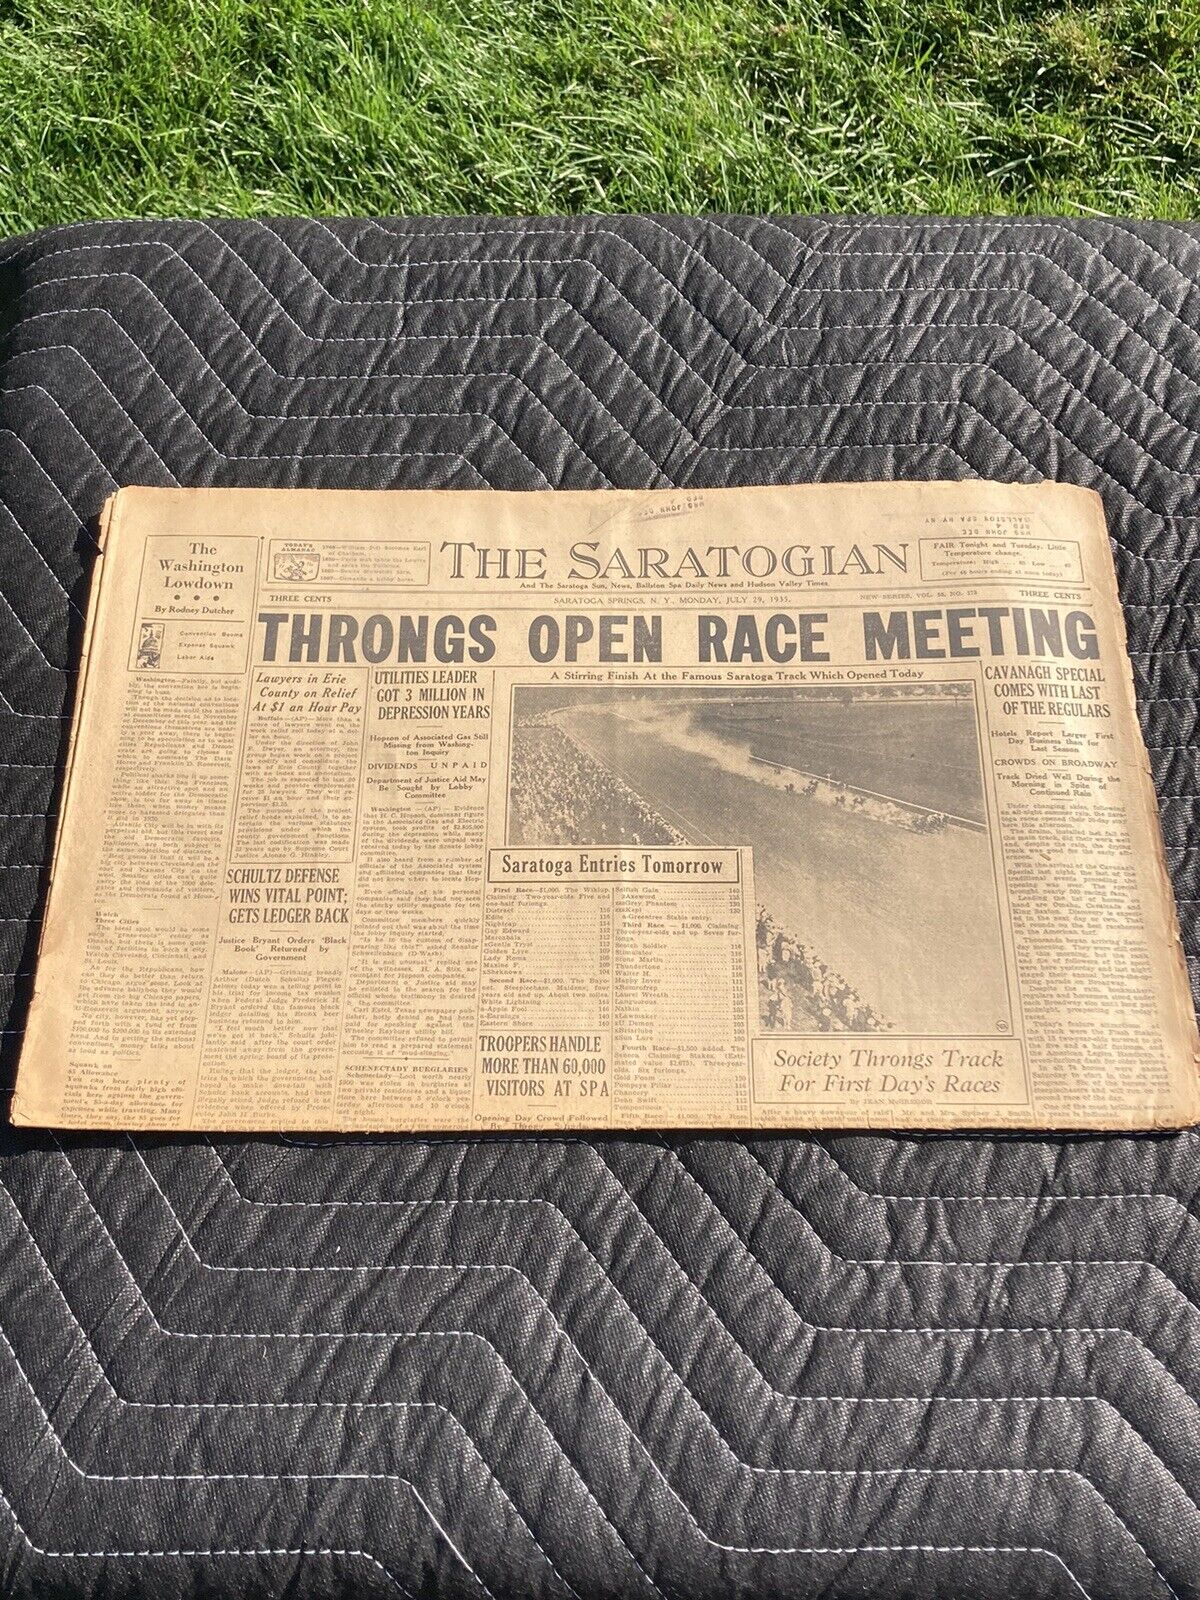 July 29, 1935 The Saratogian Newspaper “Throngs Open Race Meeting” *RARE*